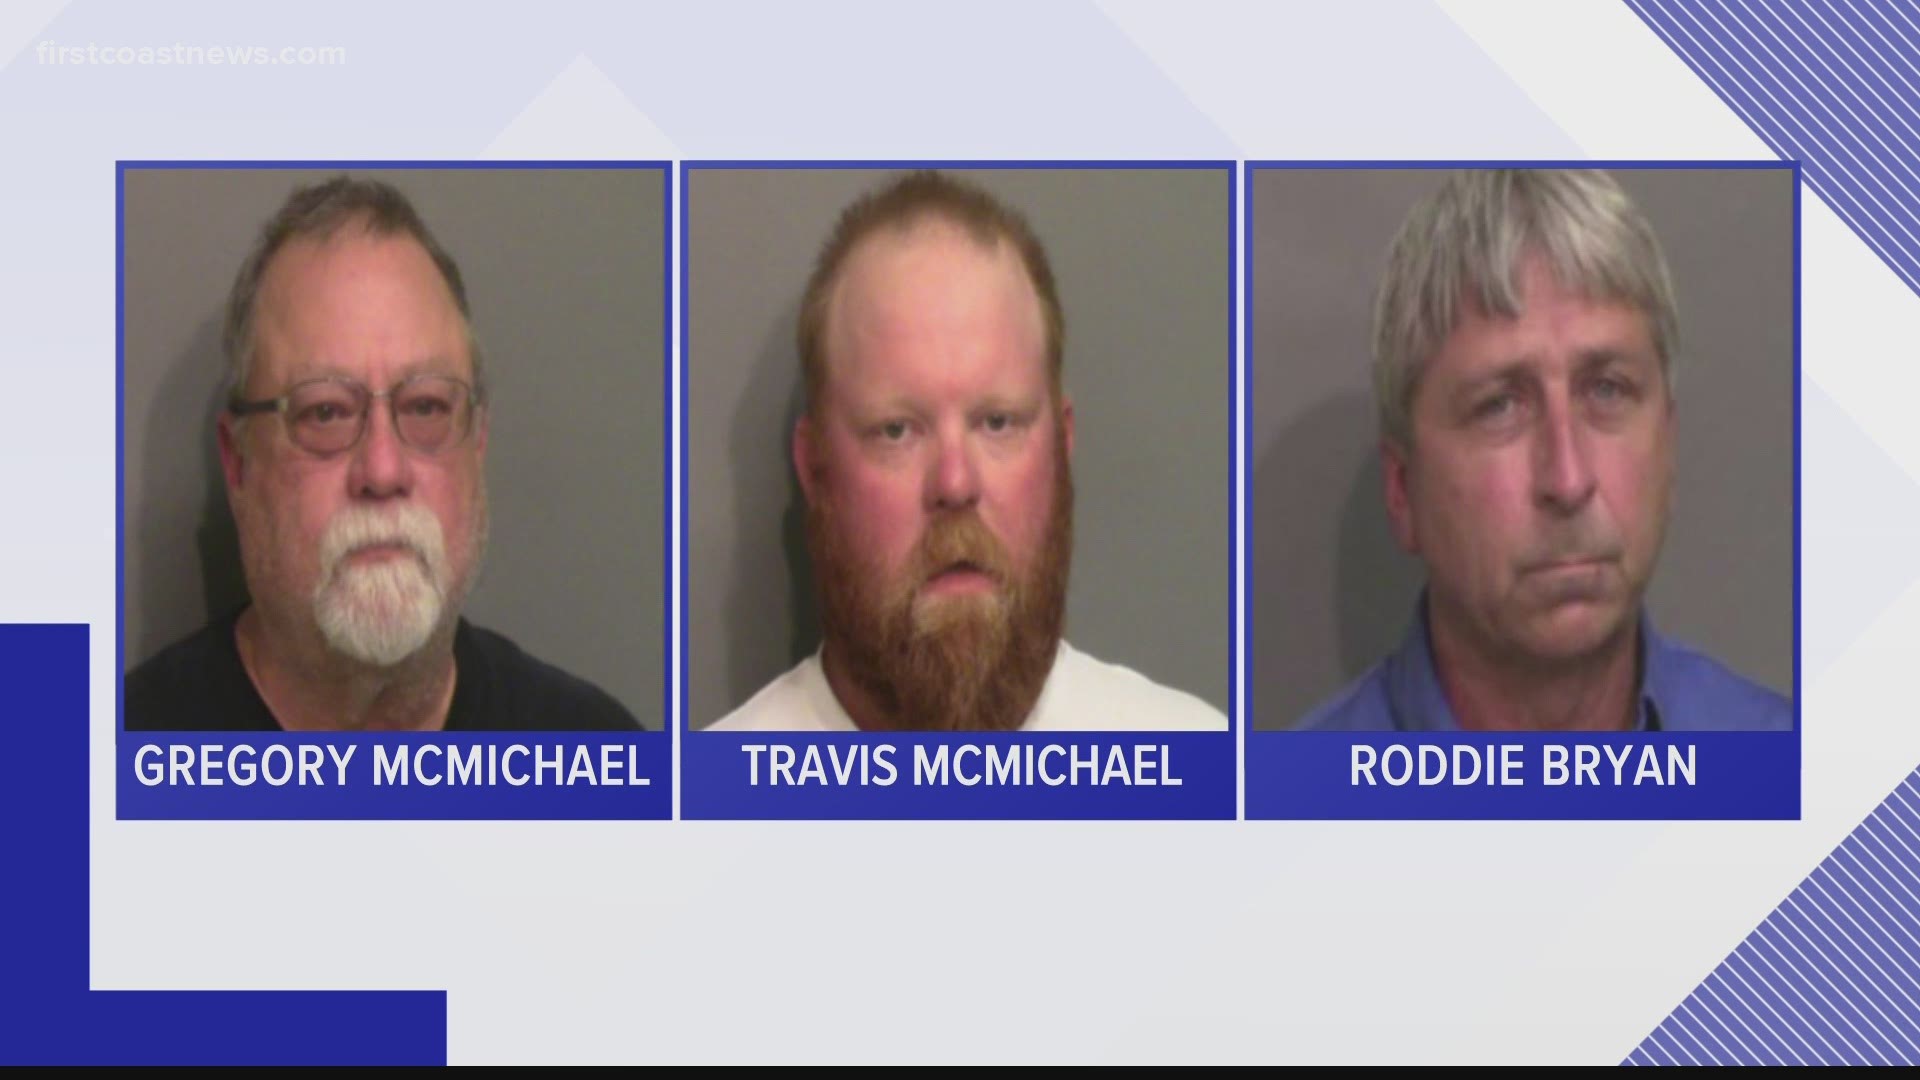 A federal grand jury returned indictments Wednesday against Travis McMichael, Gregory McMichael and William "Roddie" Bryan on hate crimes and attempted kidnapping.